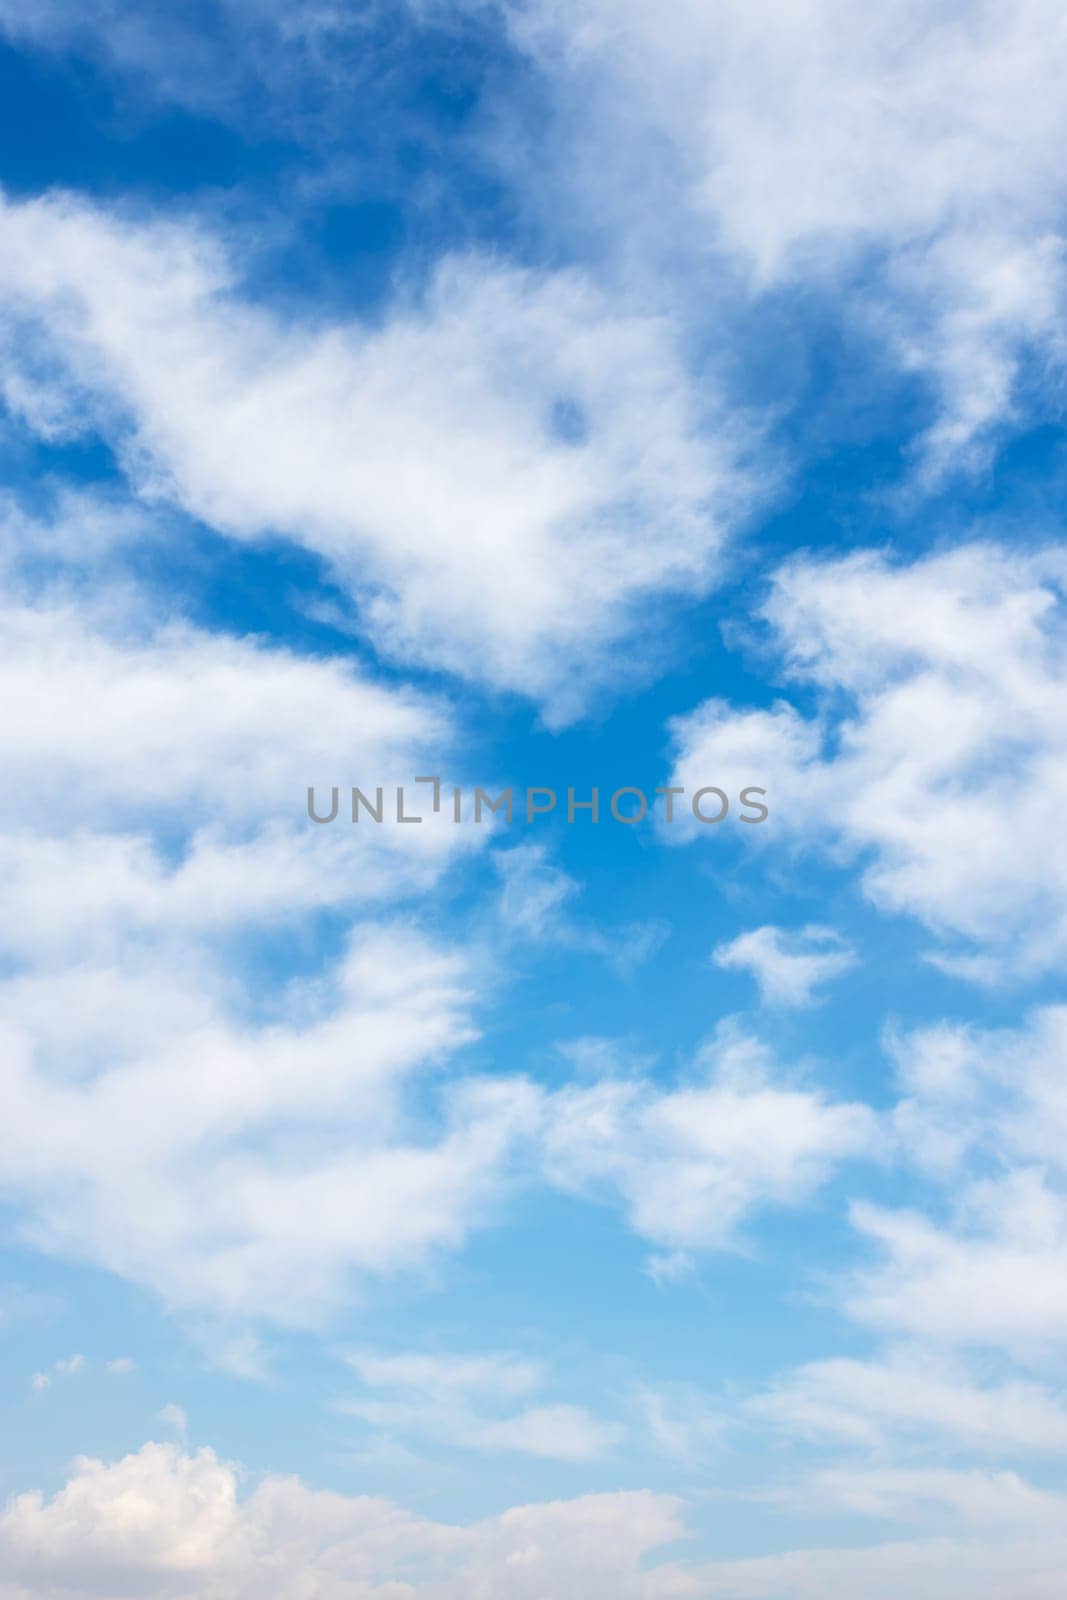 Blue sky background with white clouds. Concepts and textures.